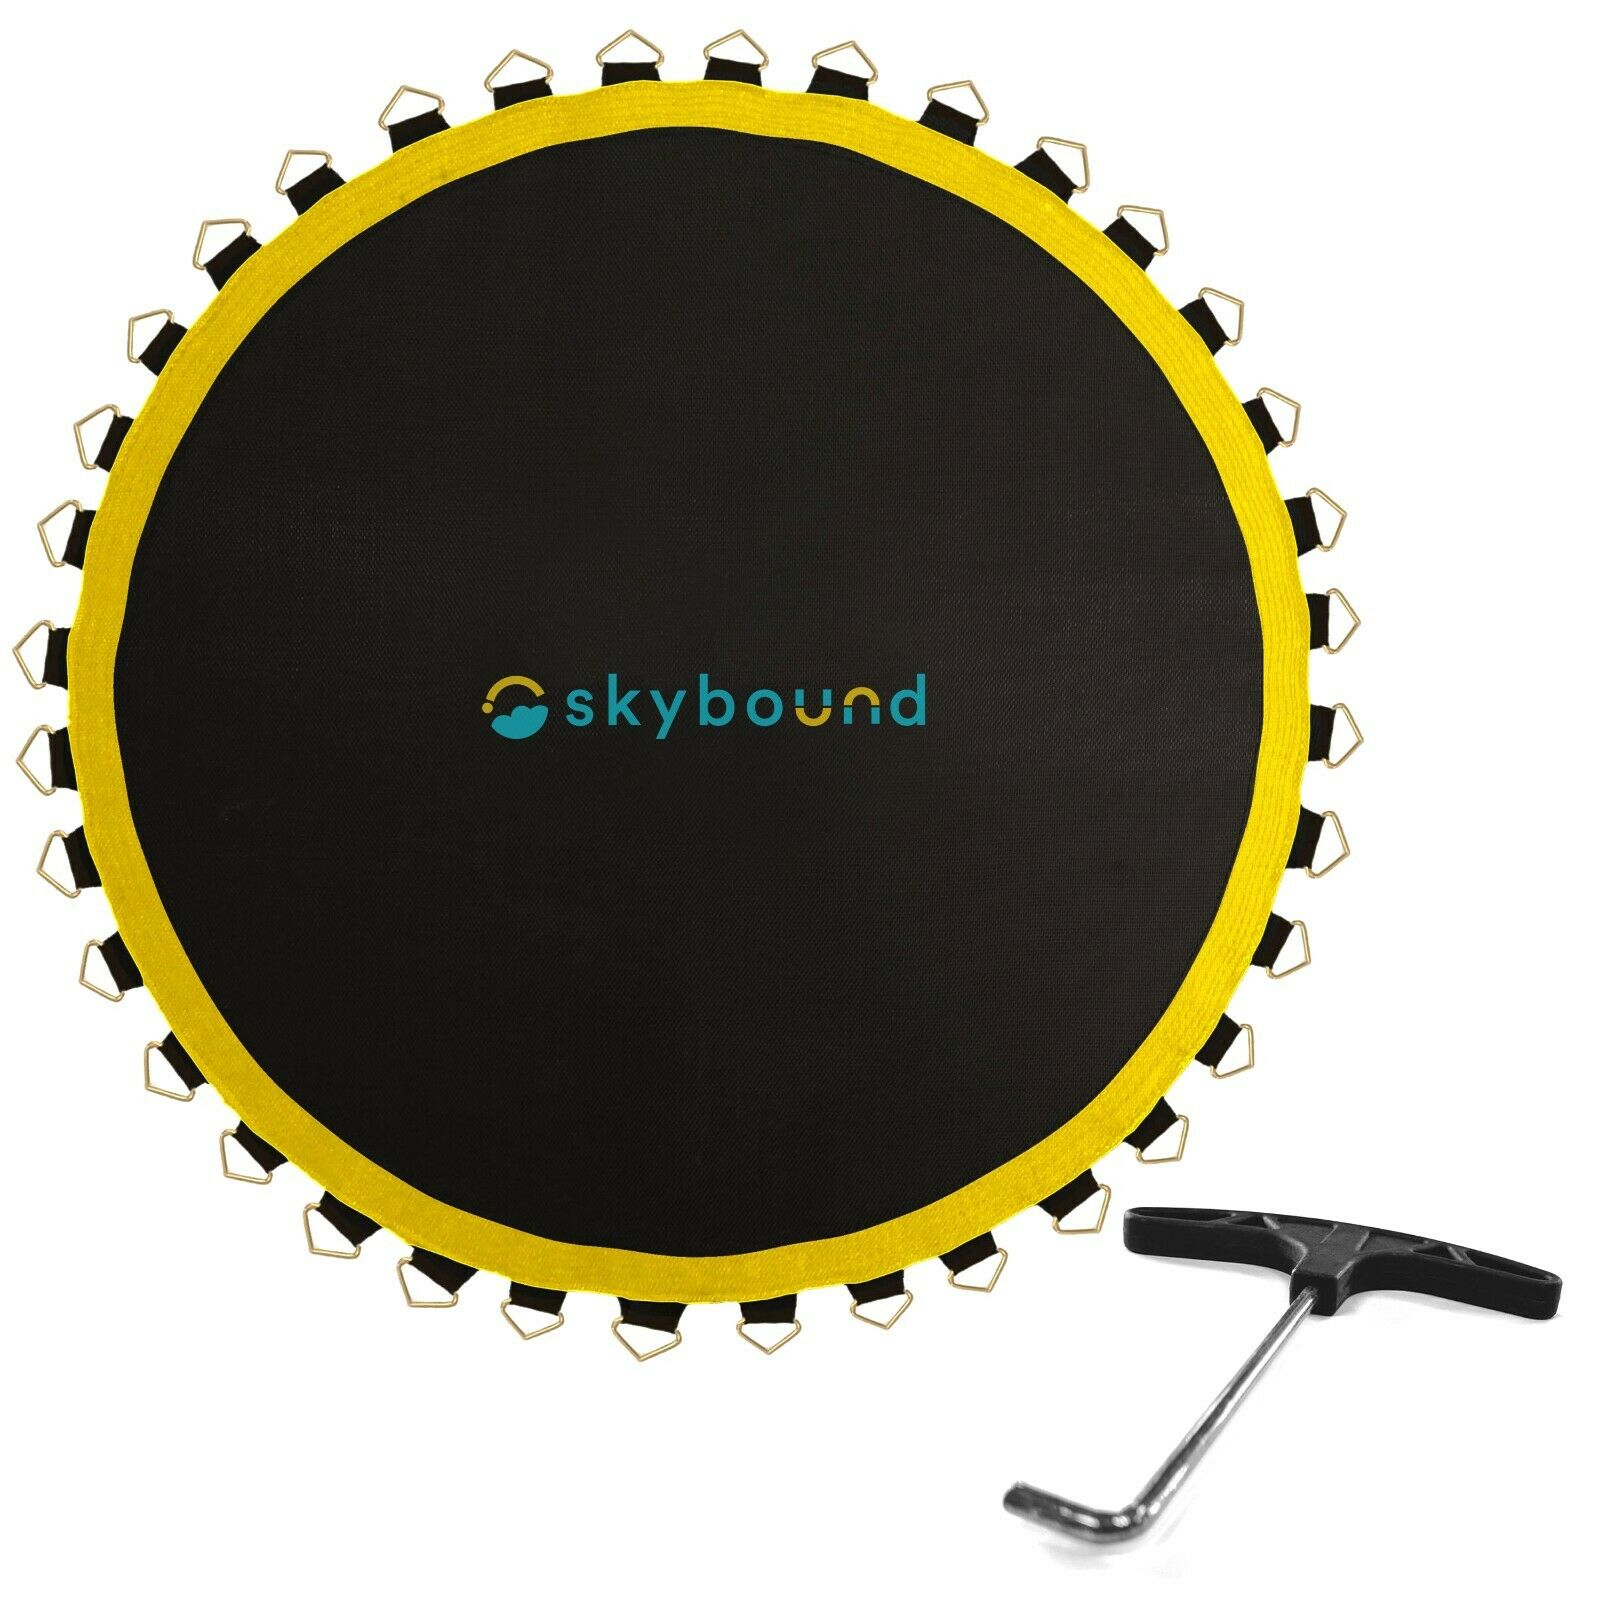 Skybound Premium Trampoline Mat W/sunguard (12, 14, Or 15 Ft Frame) Bounce Bed